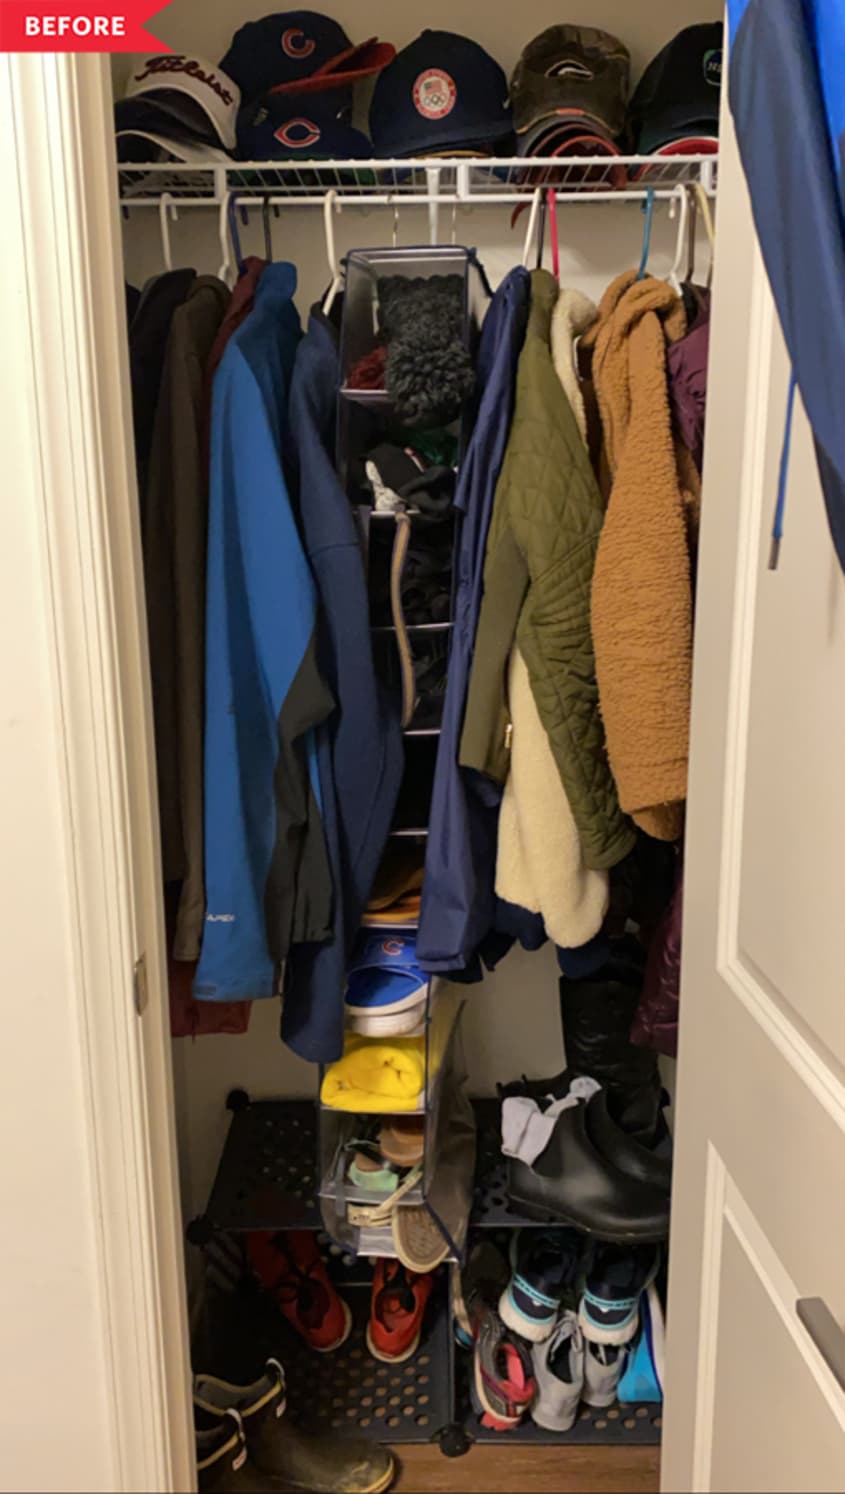 Before: crowded closet full of coats and hats